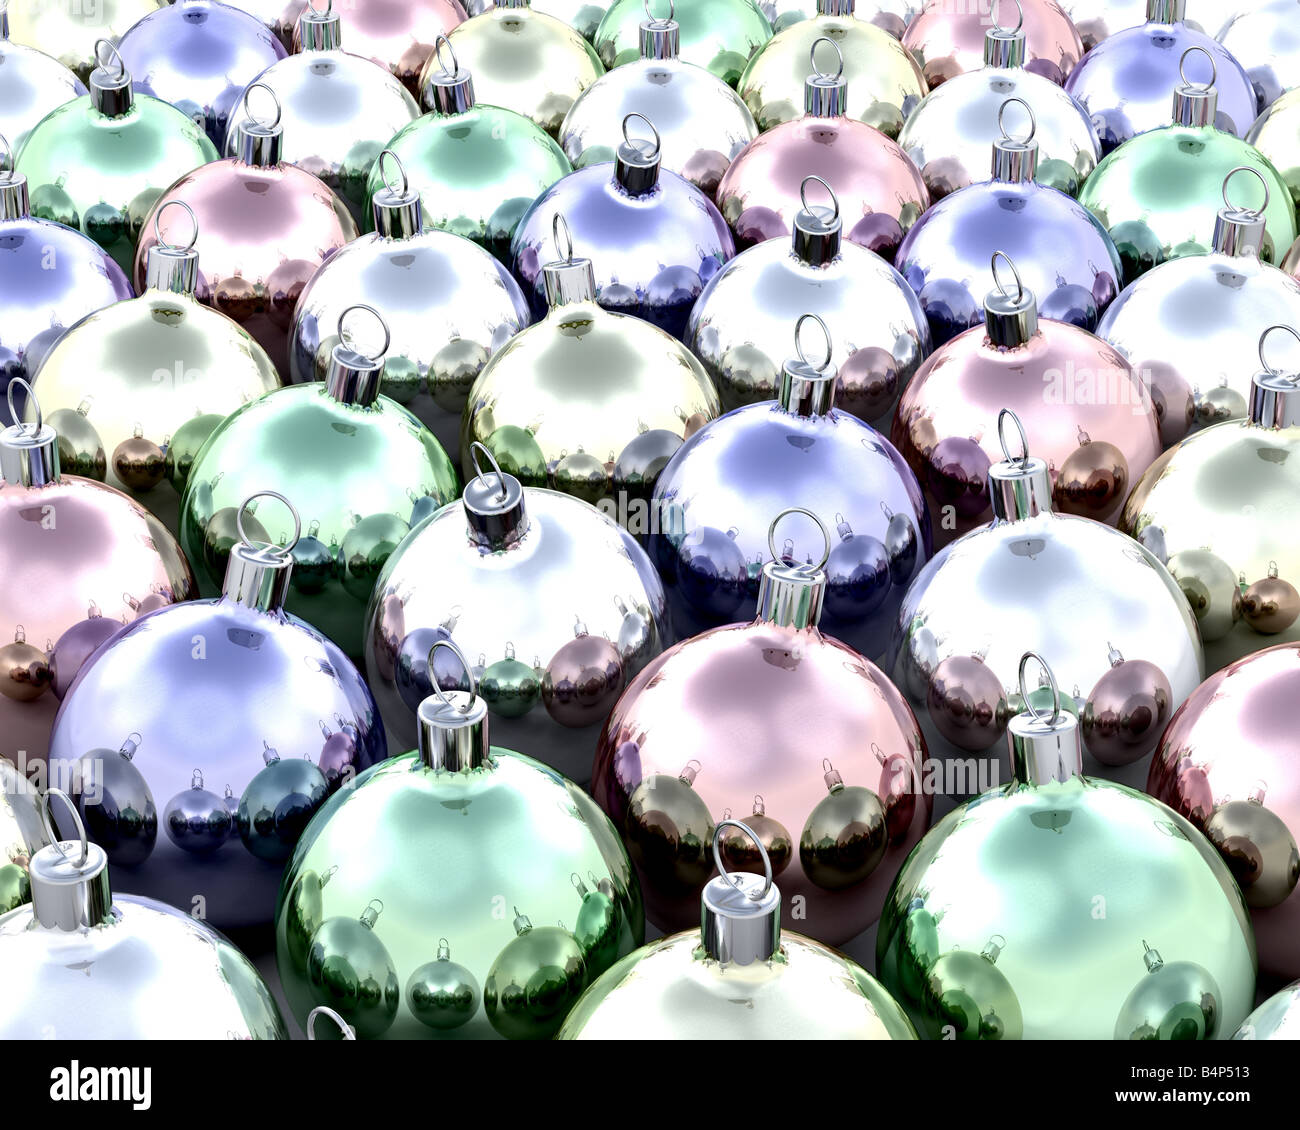 3D render of lots of Christmas baubles Stock Photo